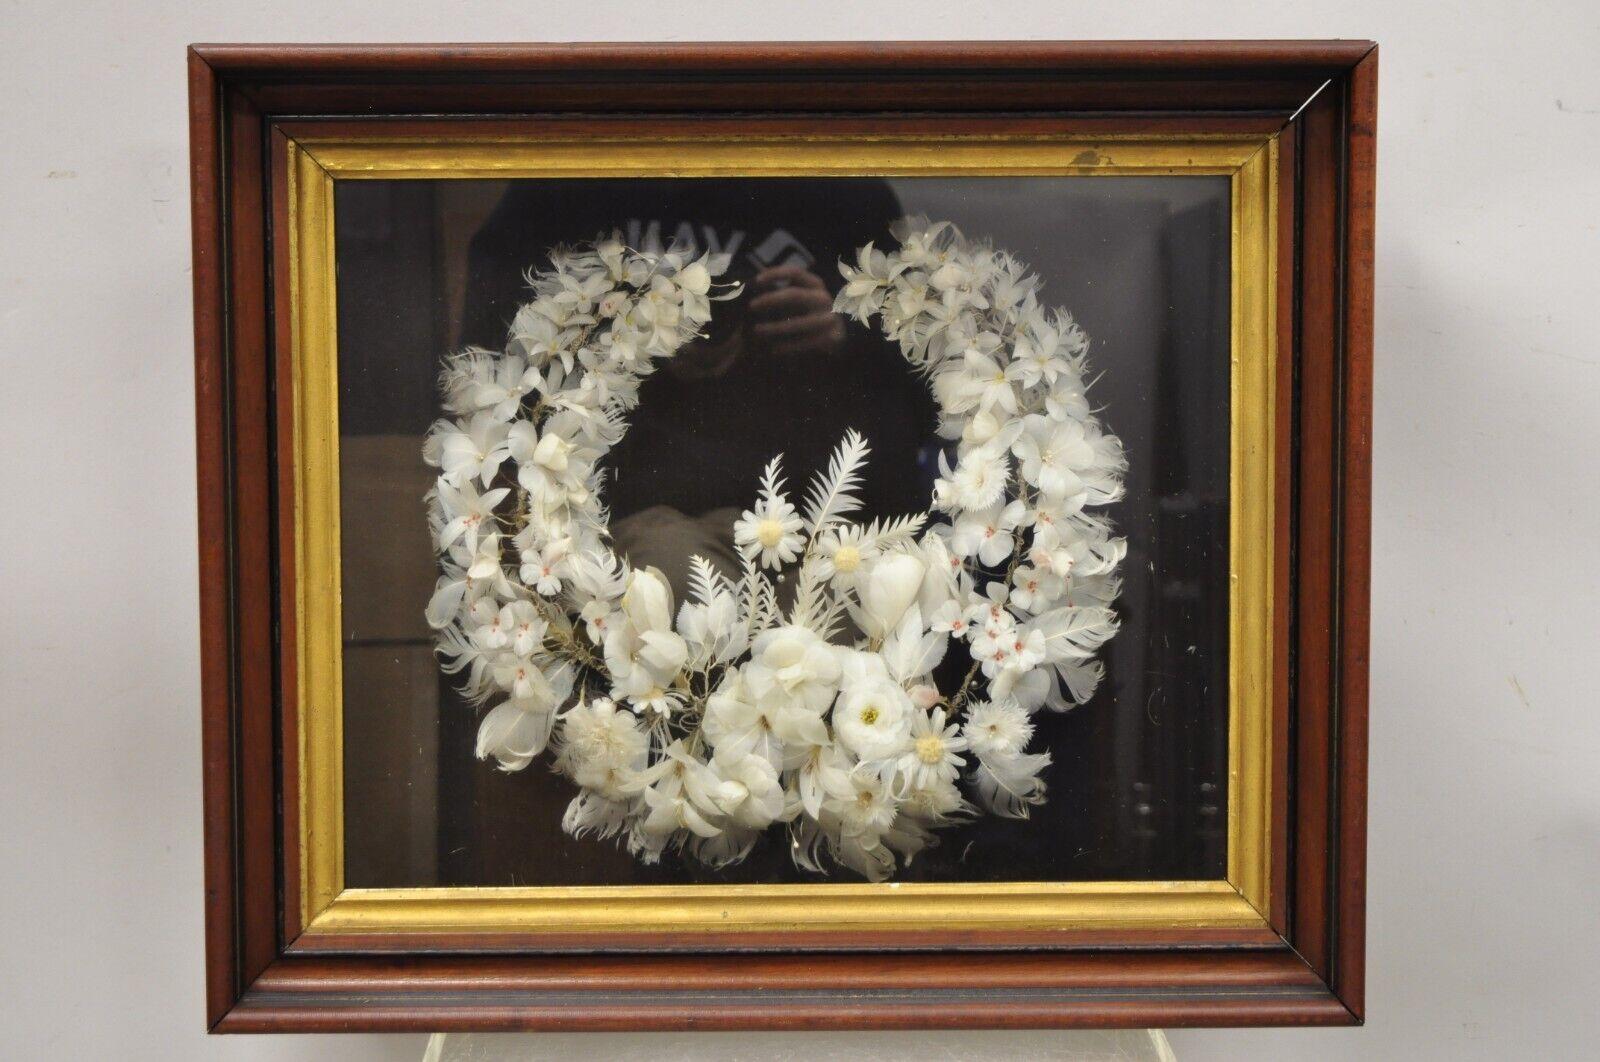 Antique Victorian White Feather Flower Mourning Wreath Mahogany Shadow Box Frame. Item features and ornate white feather flower arrangement, mahogany shadow box frame, gold gilt trim, glass front, very nice antique item. Circa 19th